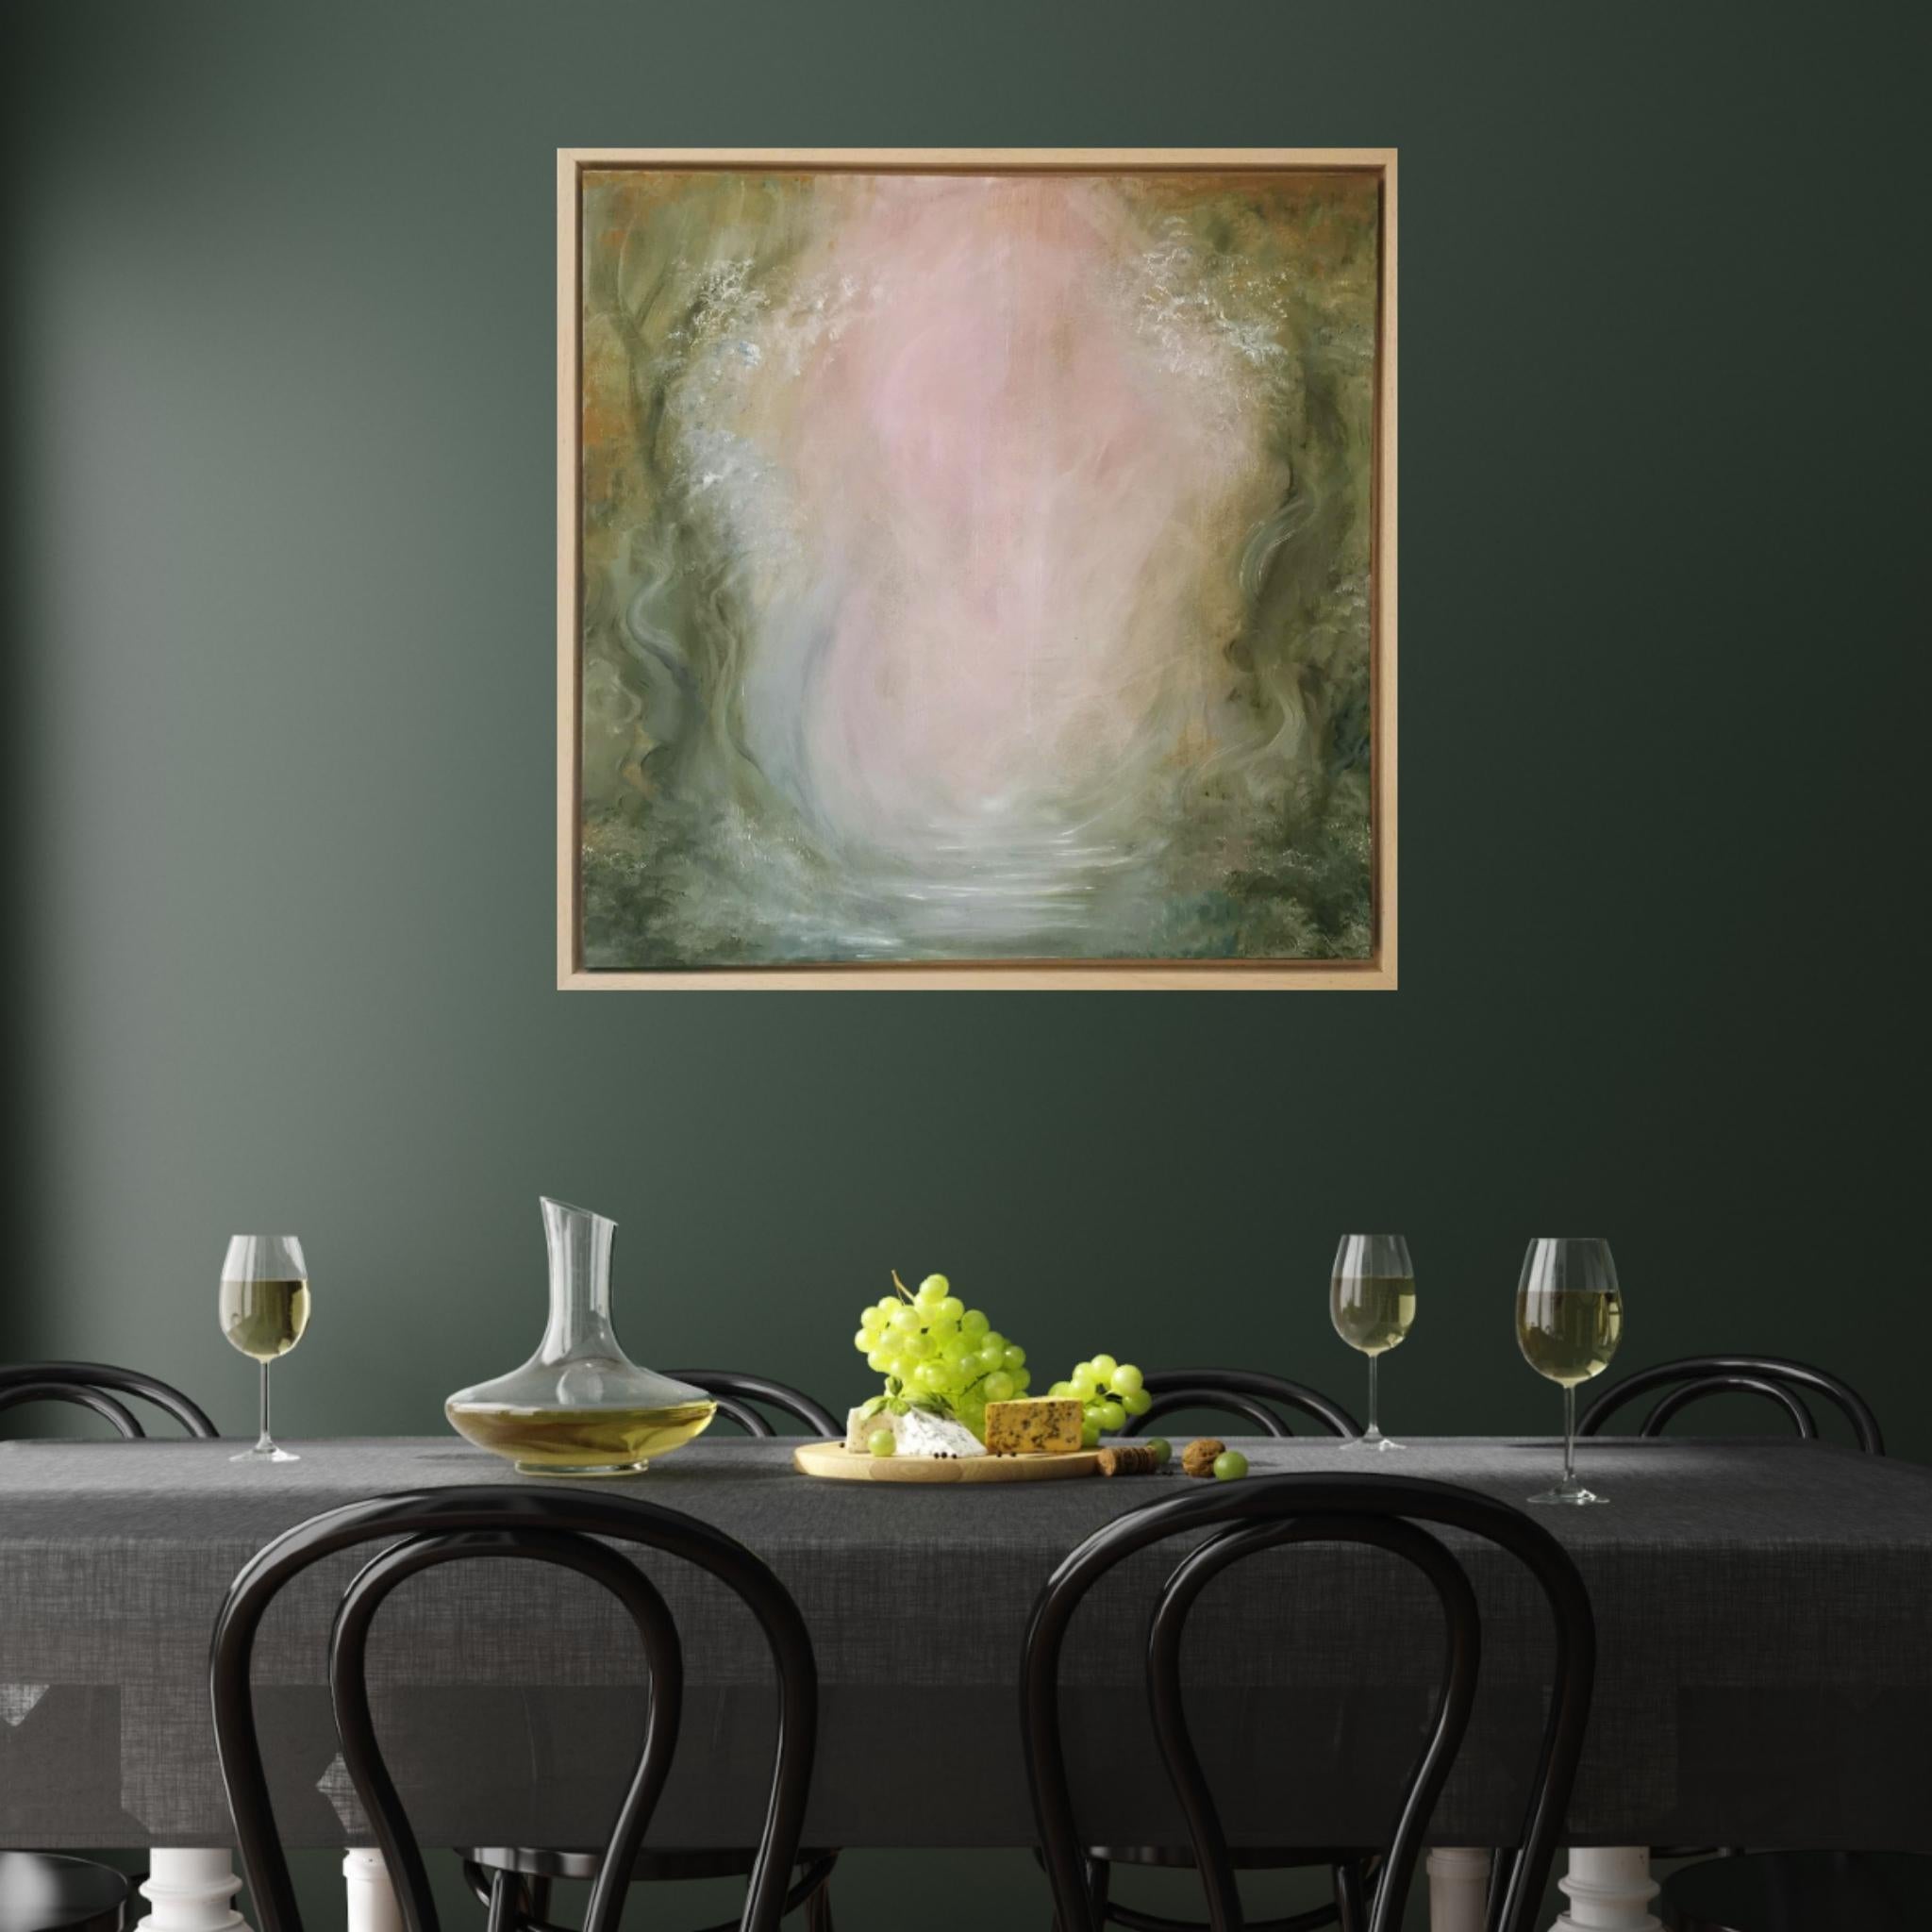 An ethereal, dreamy abstract landscape painting, a piece from the Mystic Landscapes series, born of an imaginary inspiration. A journey towards the light in a palette of warm greens and golds, watery slate blues, and a hint of alizarin crimson. A